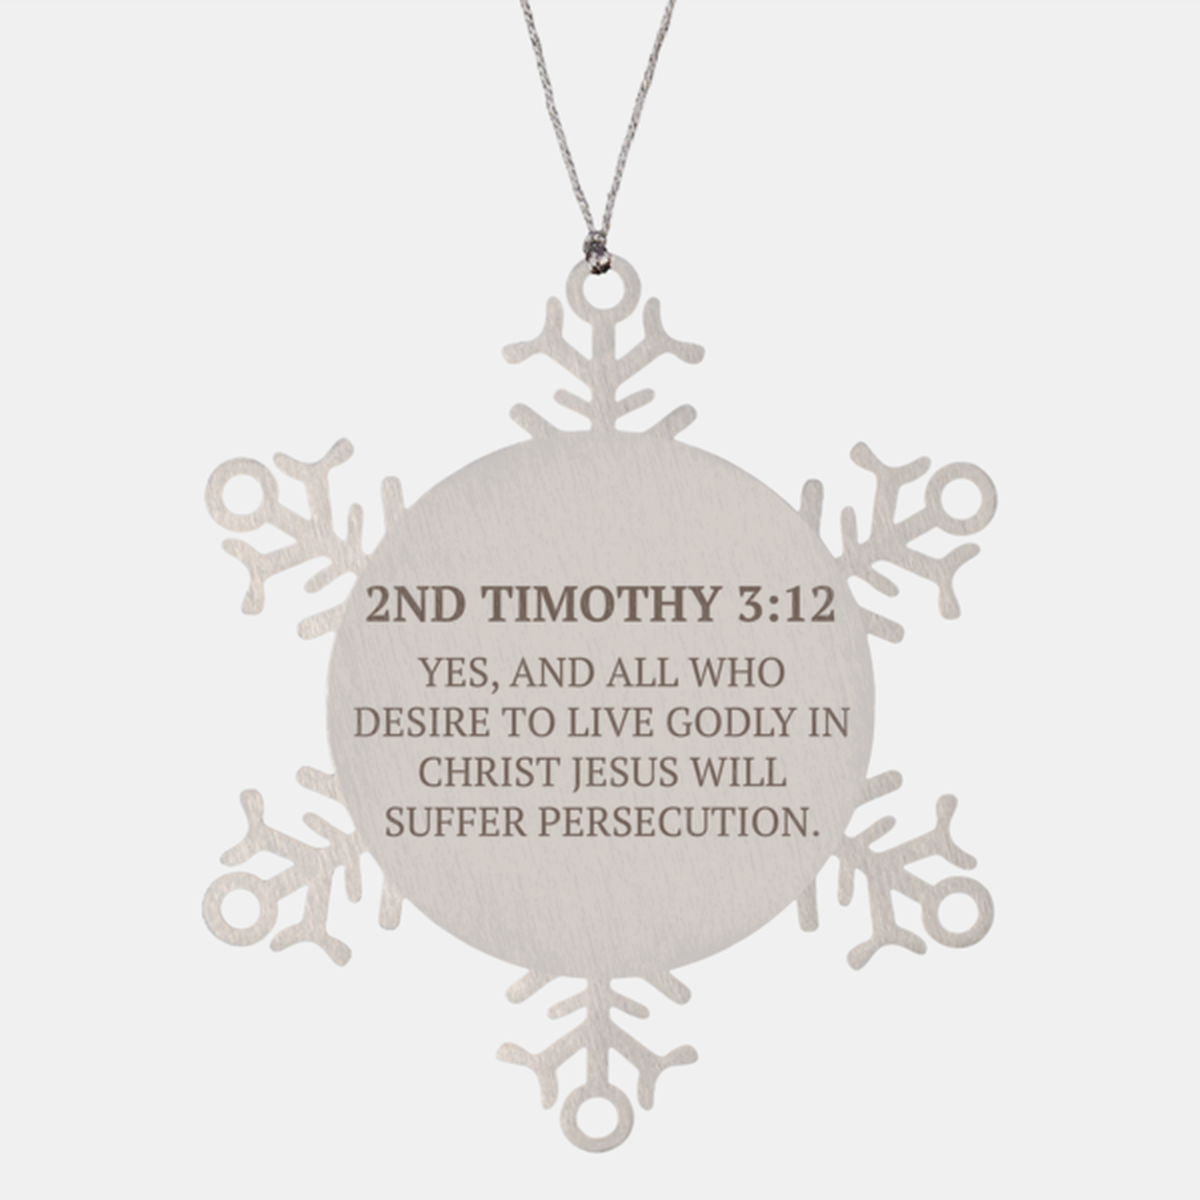 Christian Ornaments For Christmas Tree, Yes, And All Who Desire To Live Godly, Religious Christmas Decorations, Scripture Ornaments Gifts, Bible Verse Ornament